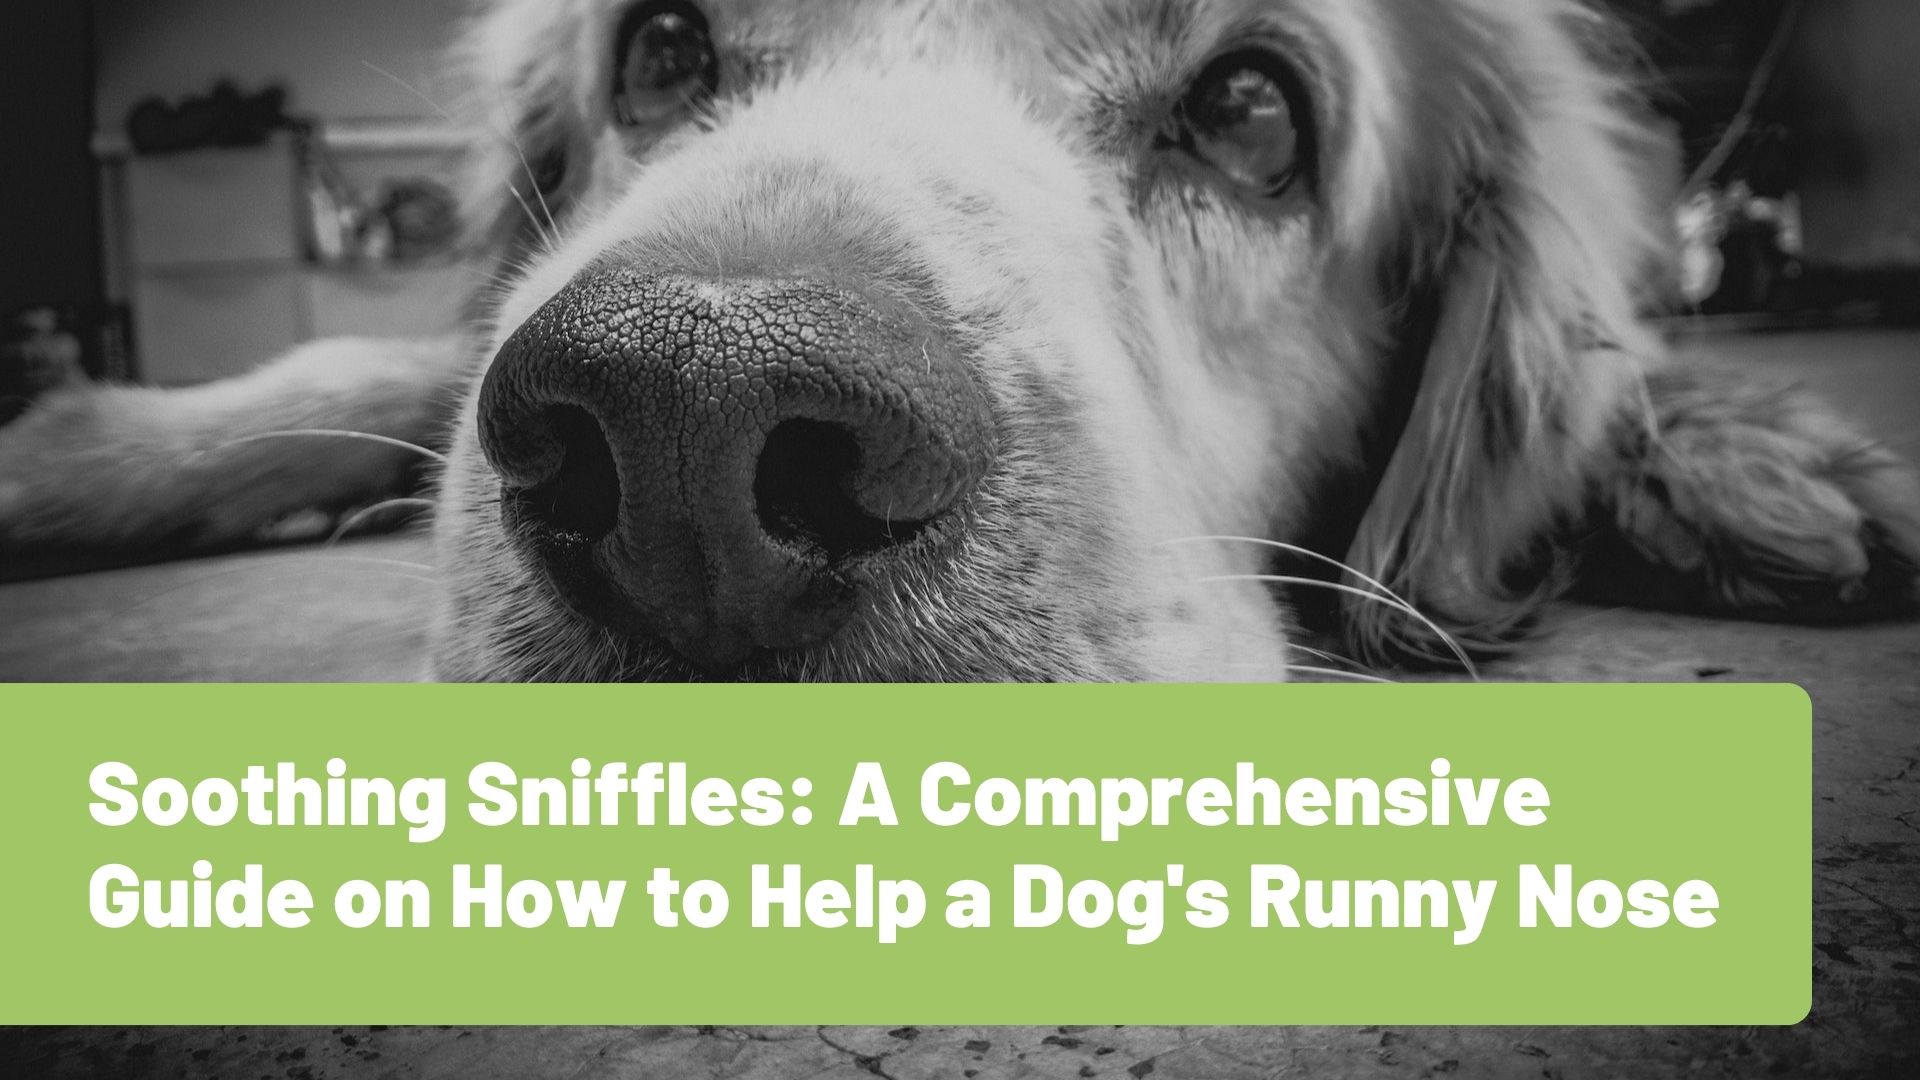 Soothing Sniffles A Comprehensive Guide on How to Help a Dog's Runny Nose - RawOrigins.Pet - A Raw Dog Food Company